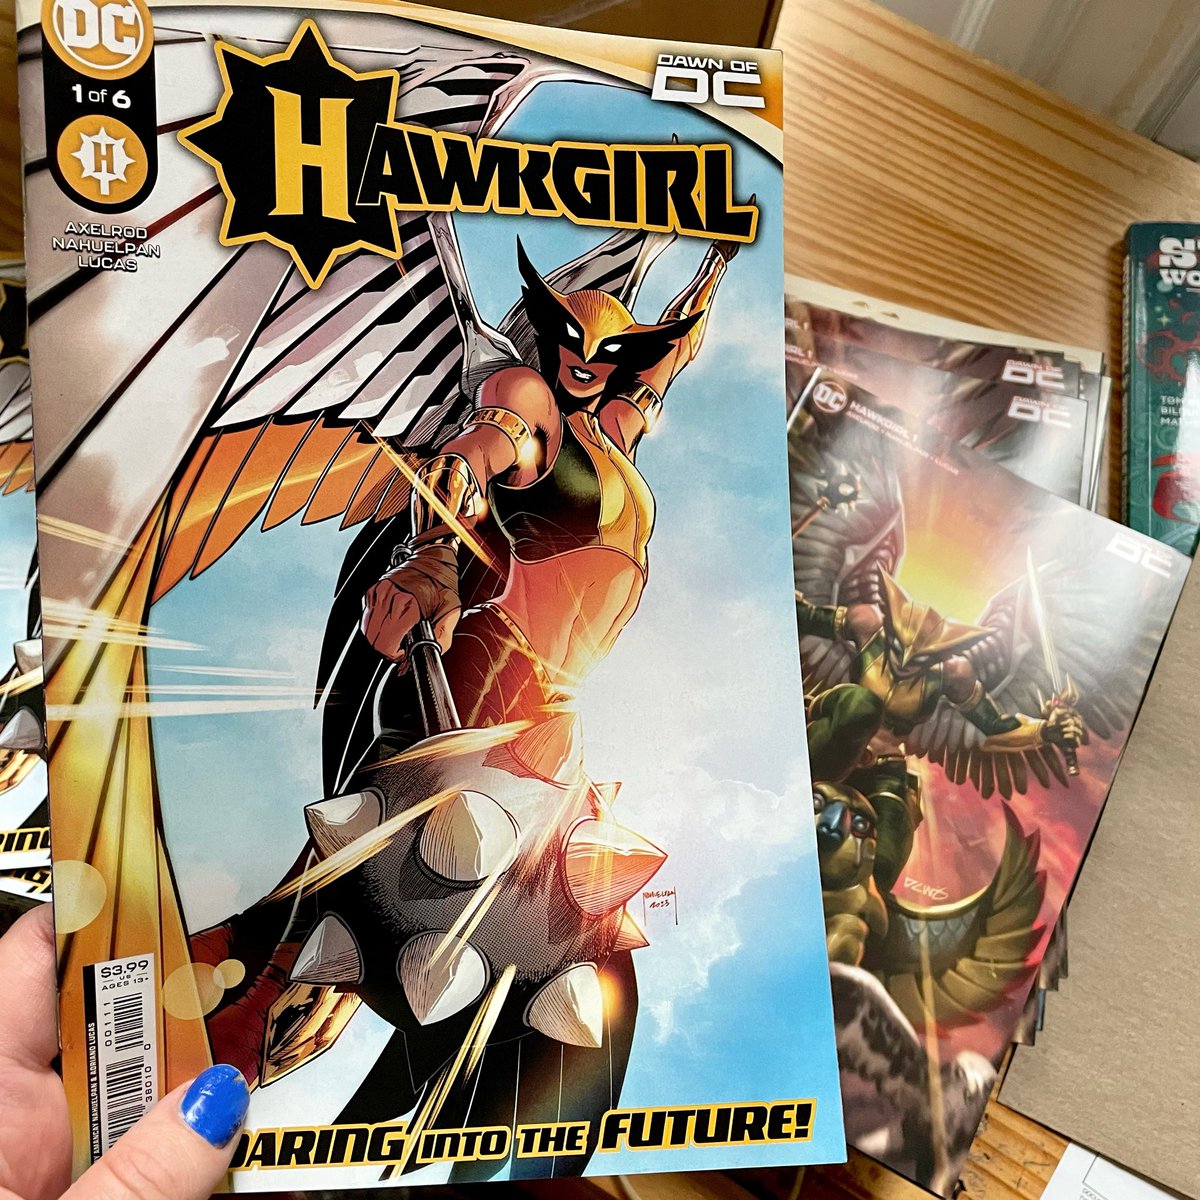 HAWKGIRL #1 hits stores next week, but I got my copies early. 'Cause I wrote it. #Hawkgirl #DawnOfDC